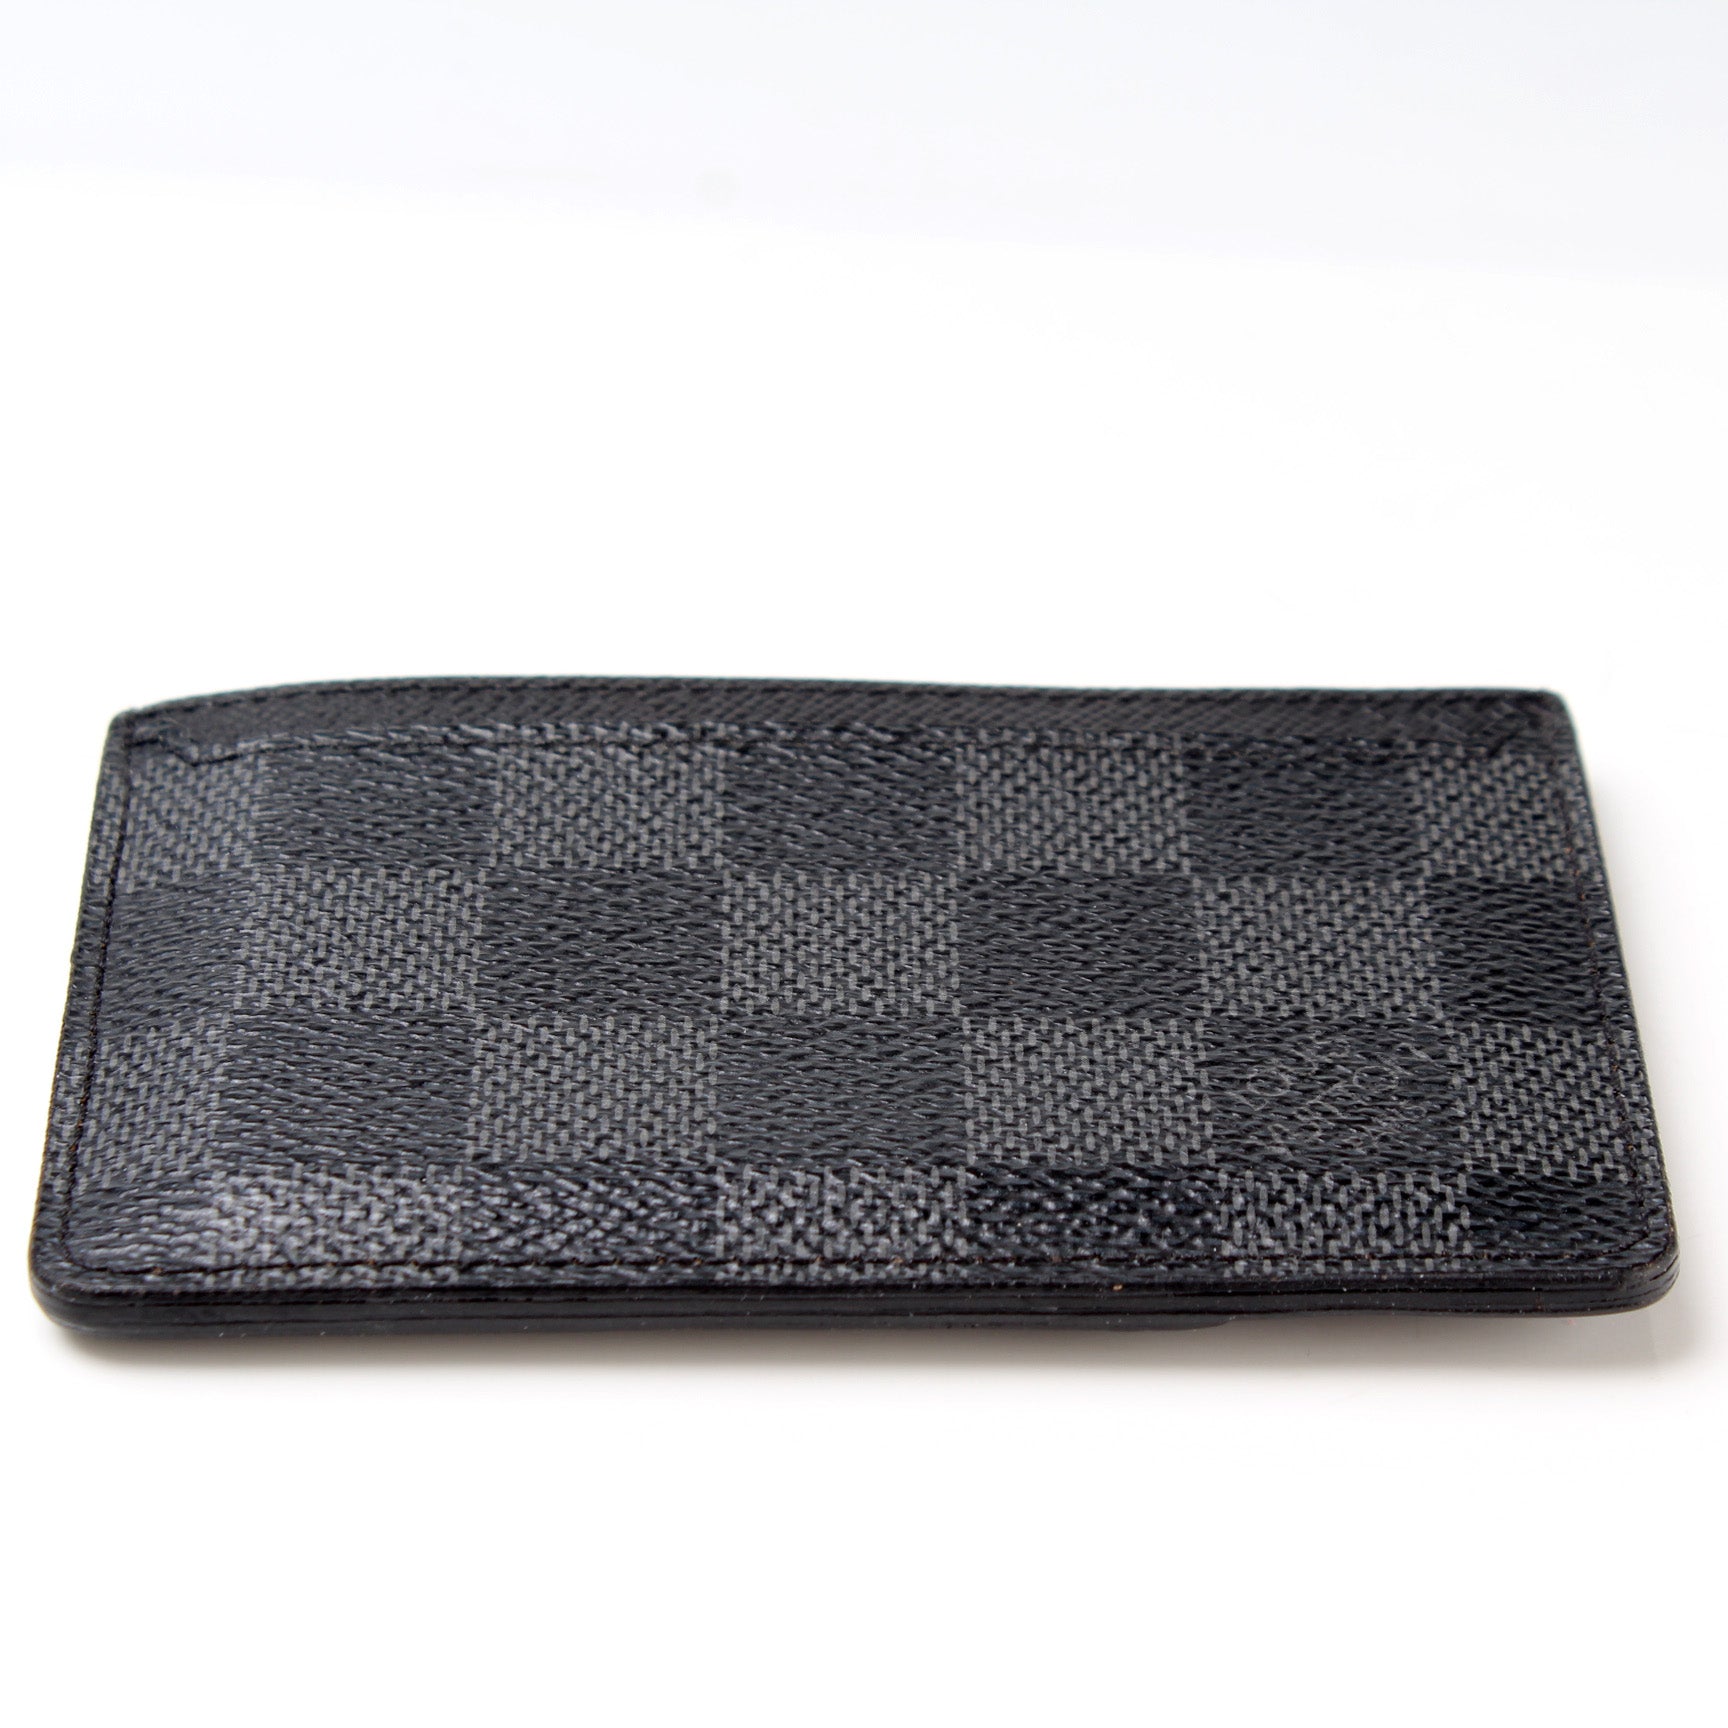 Neo Porte Cartes Damier Graphite Canvas - Wallets and Small Leather Goods  N62666